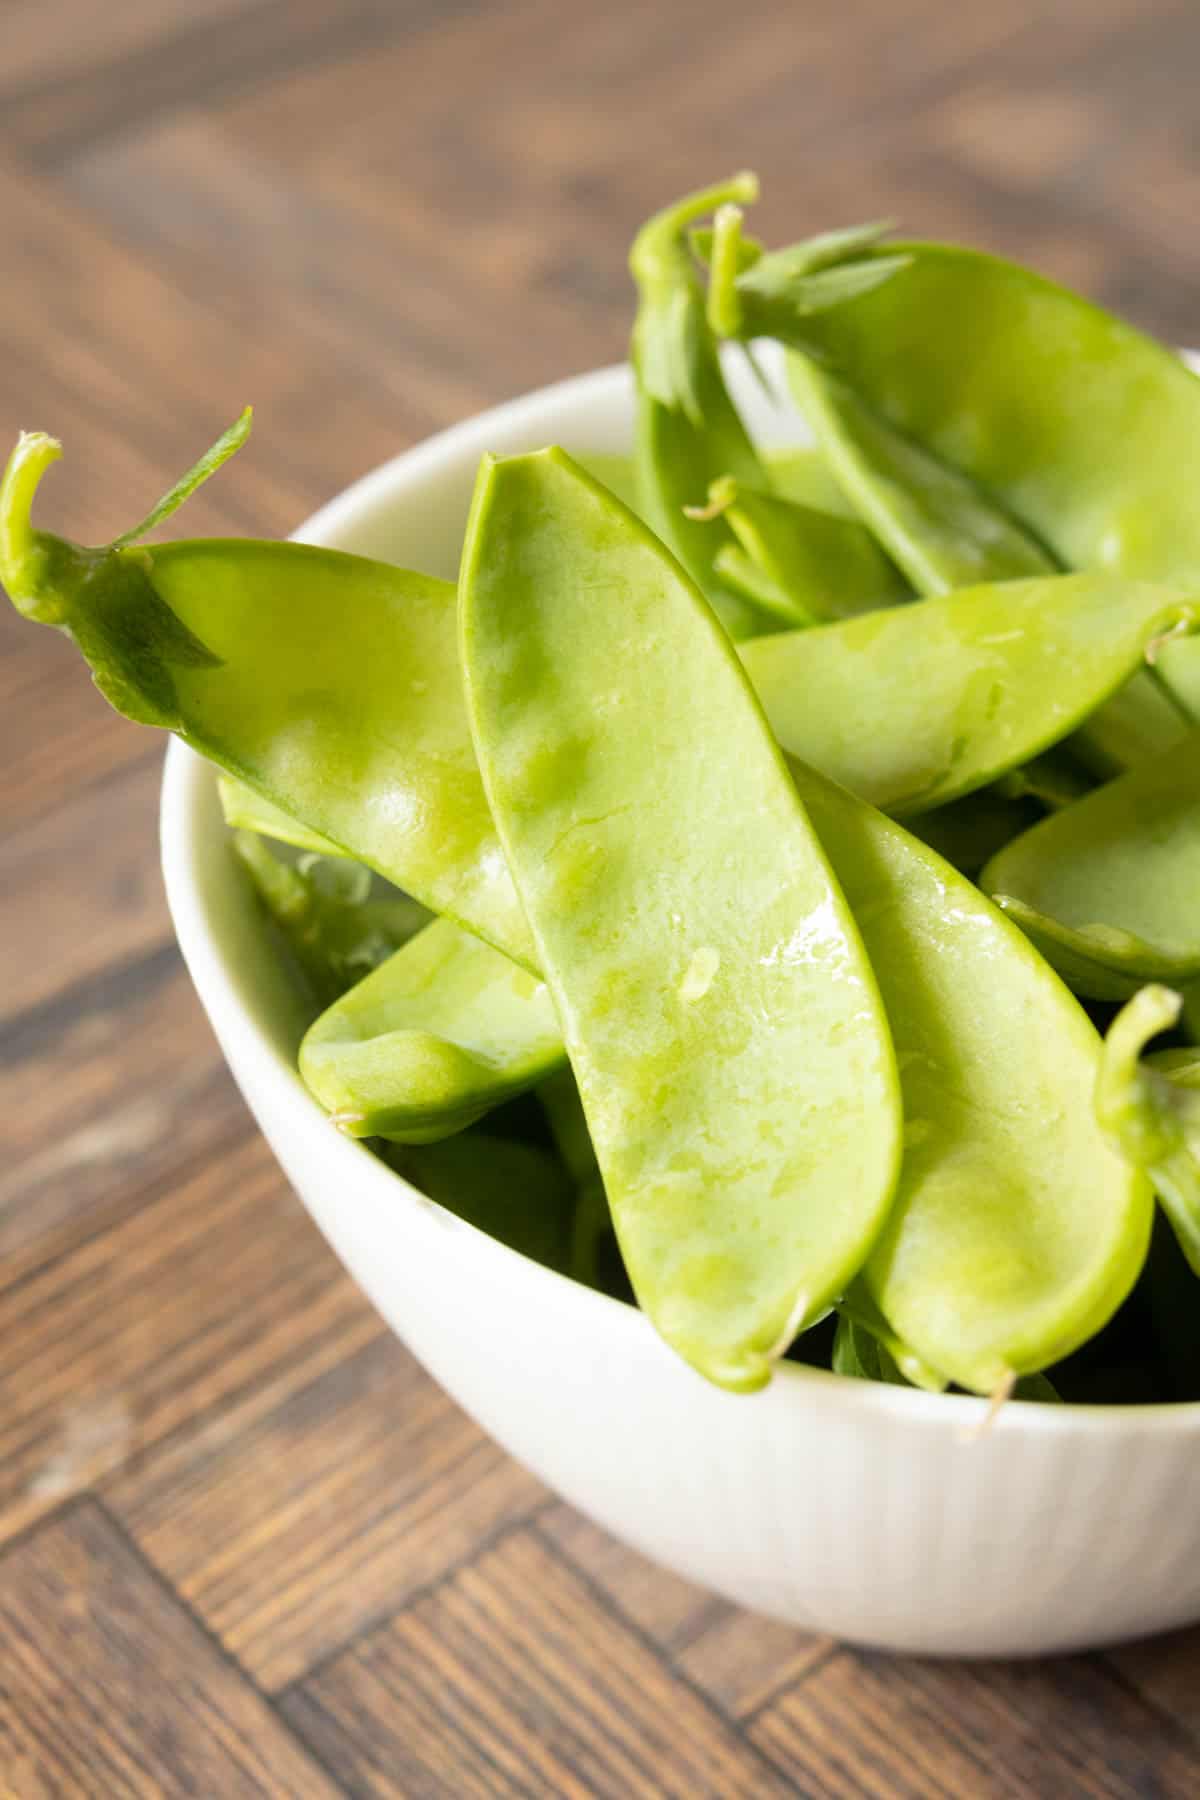 Raw snow peas in a white bowl on a wooden table.